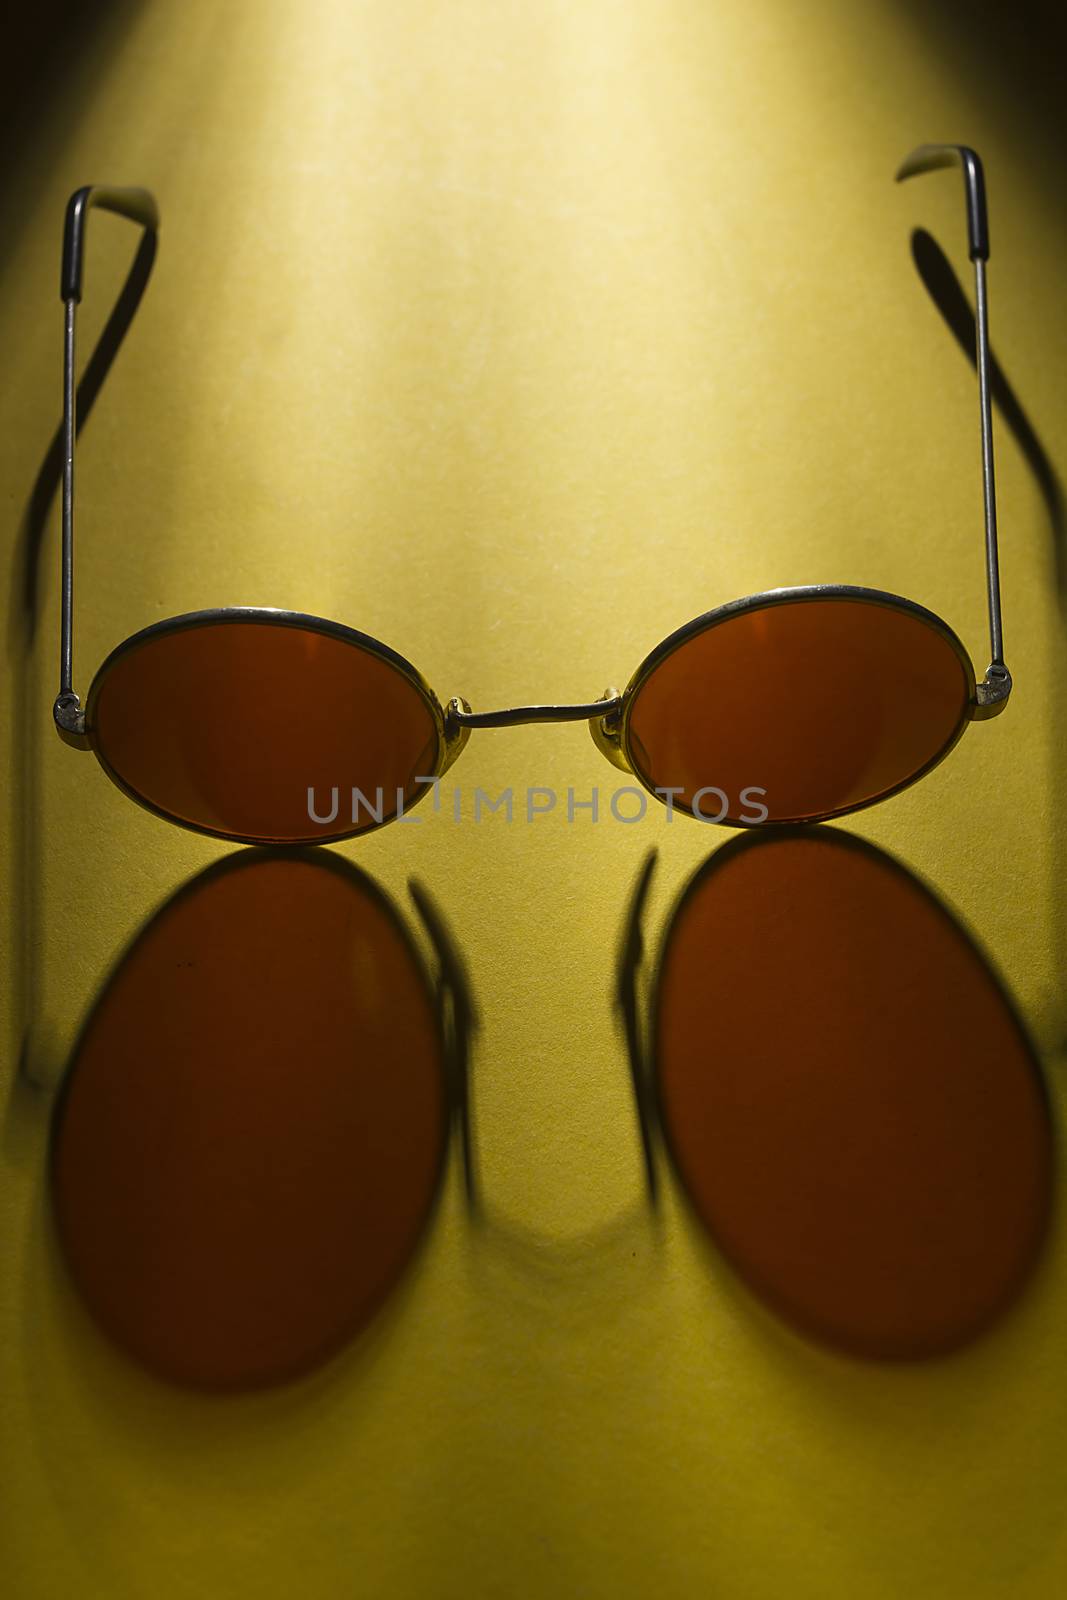 Round sunglasses on the table with yellow coating